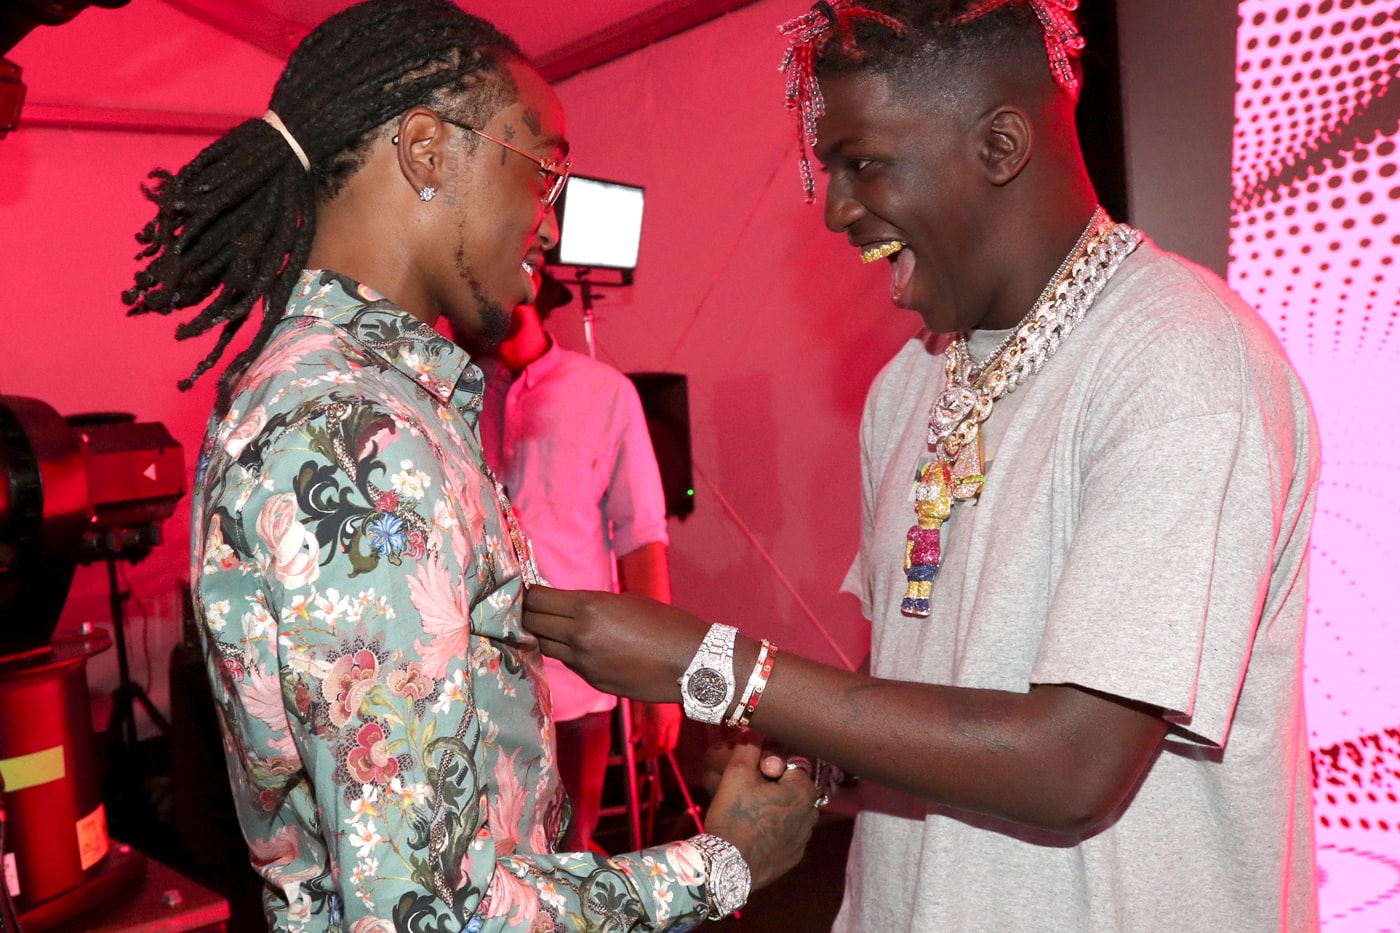 lil yachty and migos pop up shop XOYO London